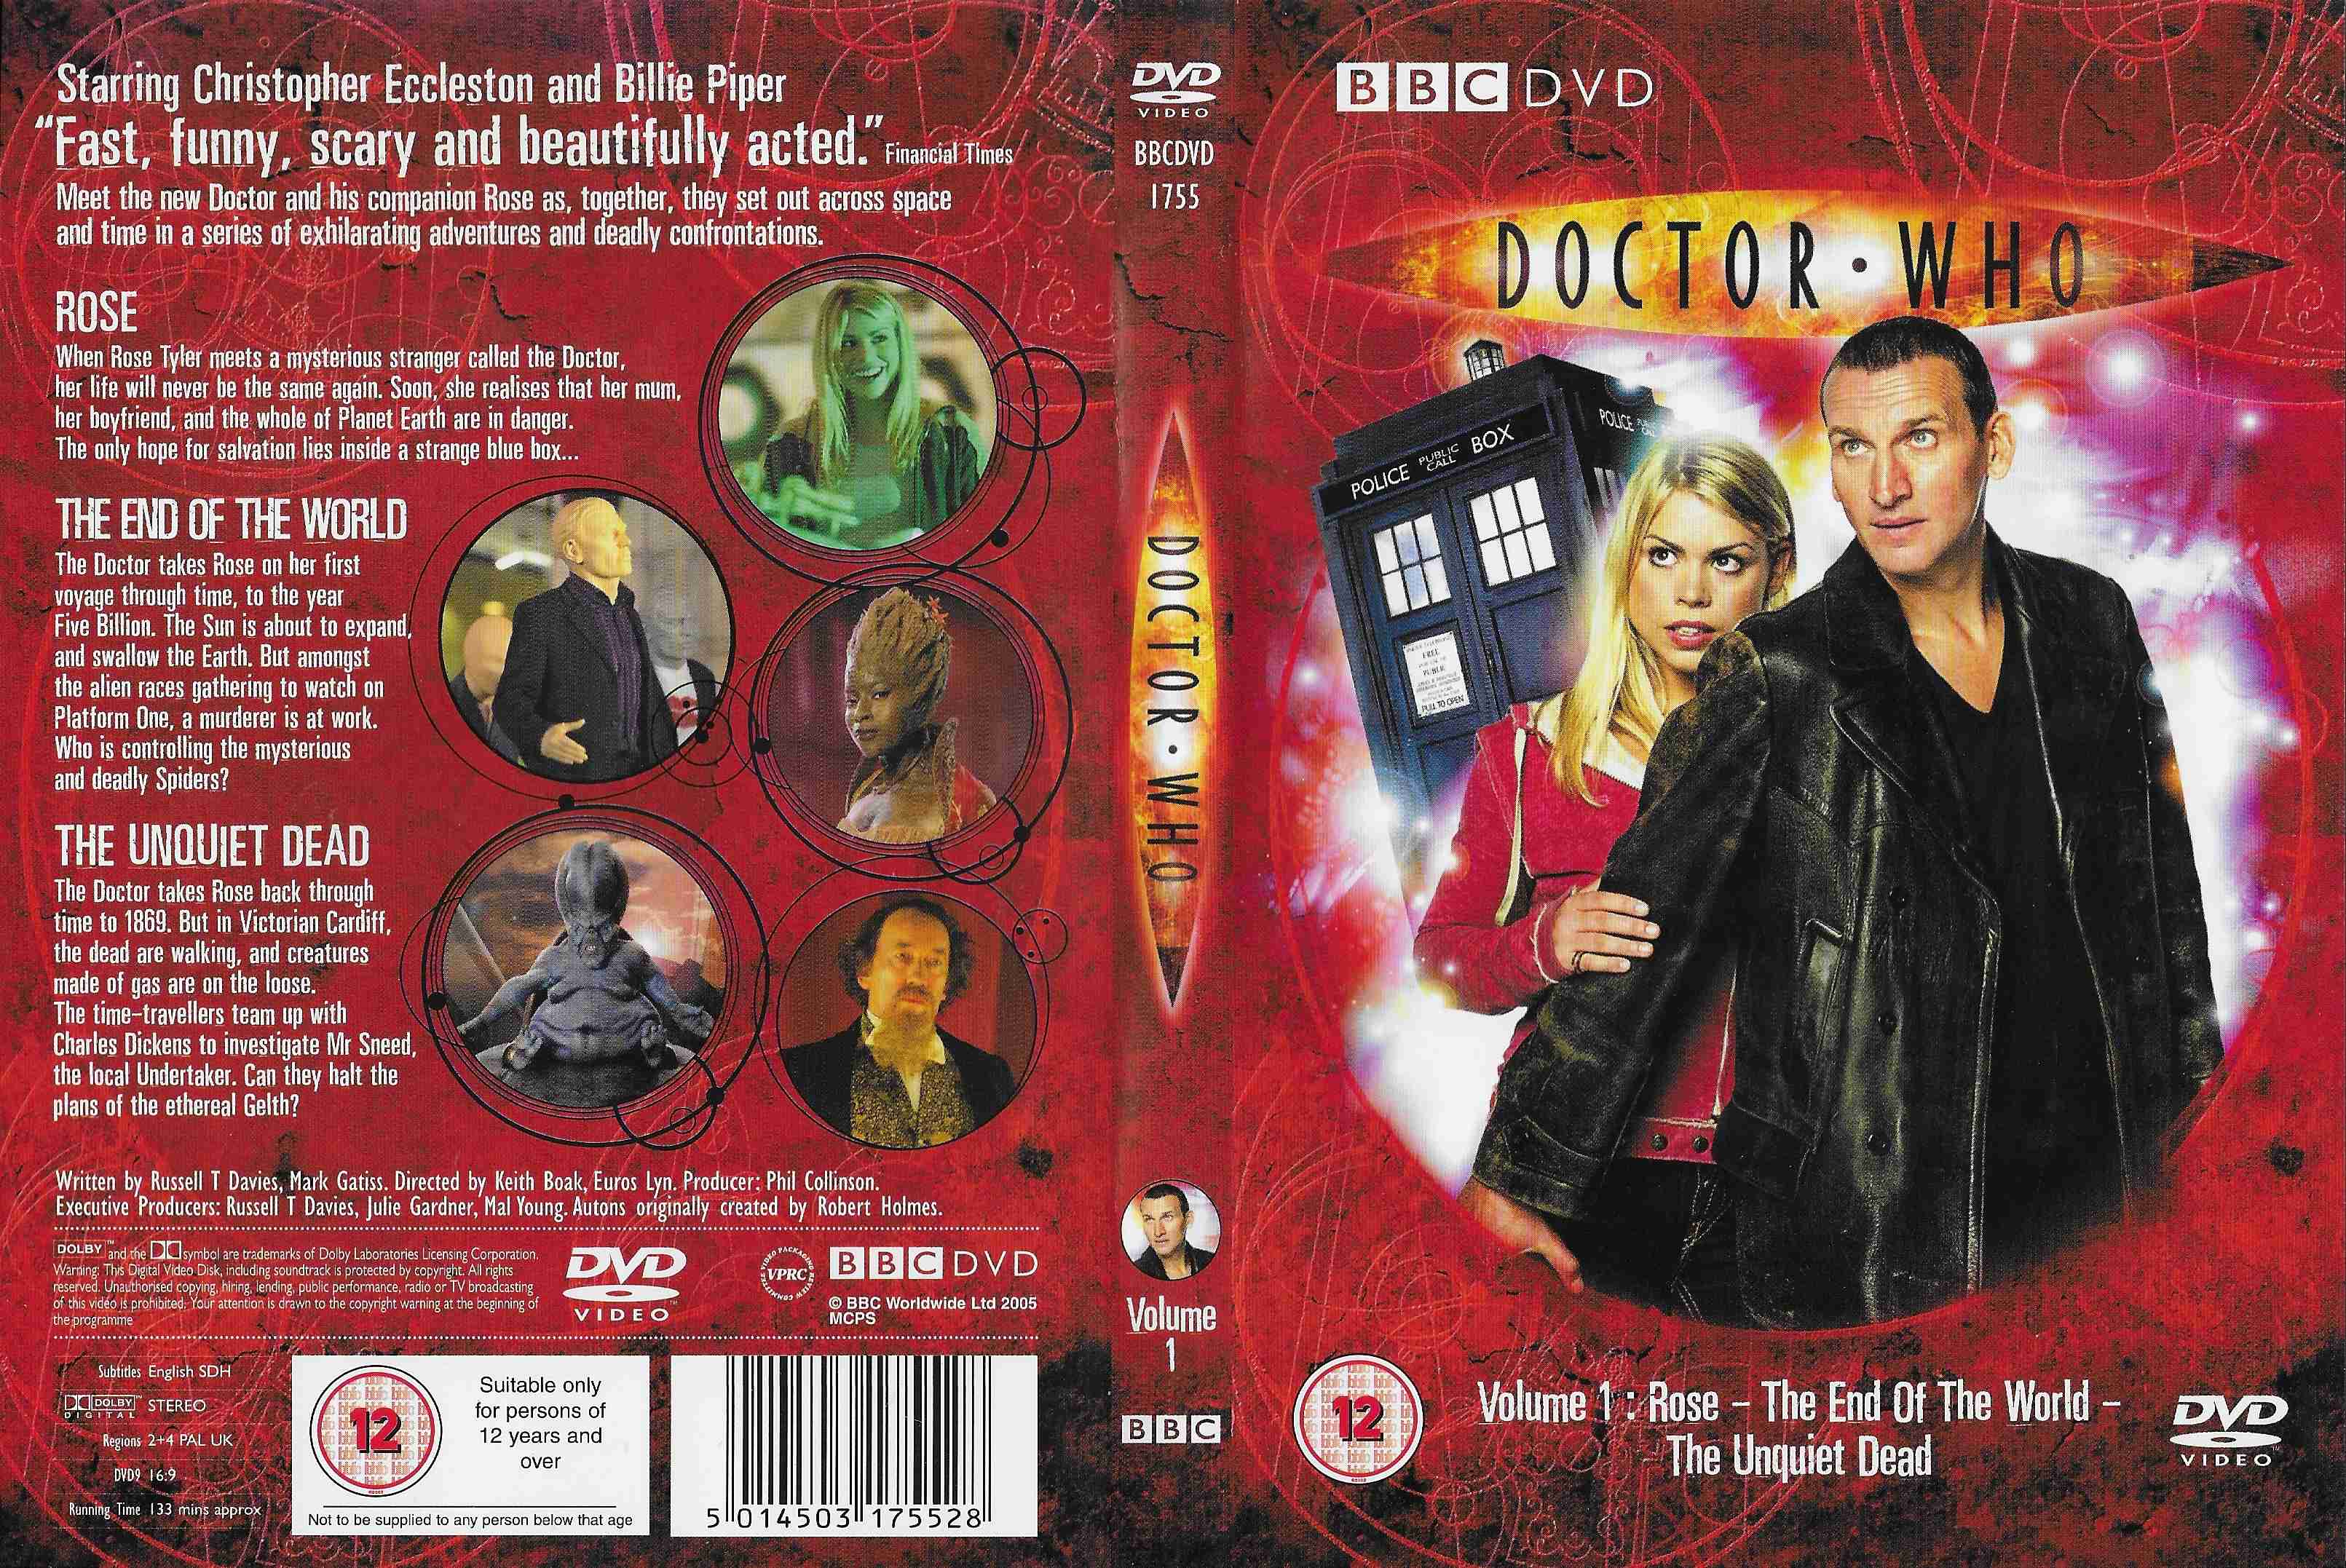 Picture of BBCDVD 1755 Doctor Who - New series, volume 1 by artist Russell T Davies / Mark Gatiss from the BBC records and Tapes library